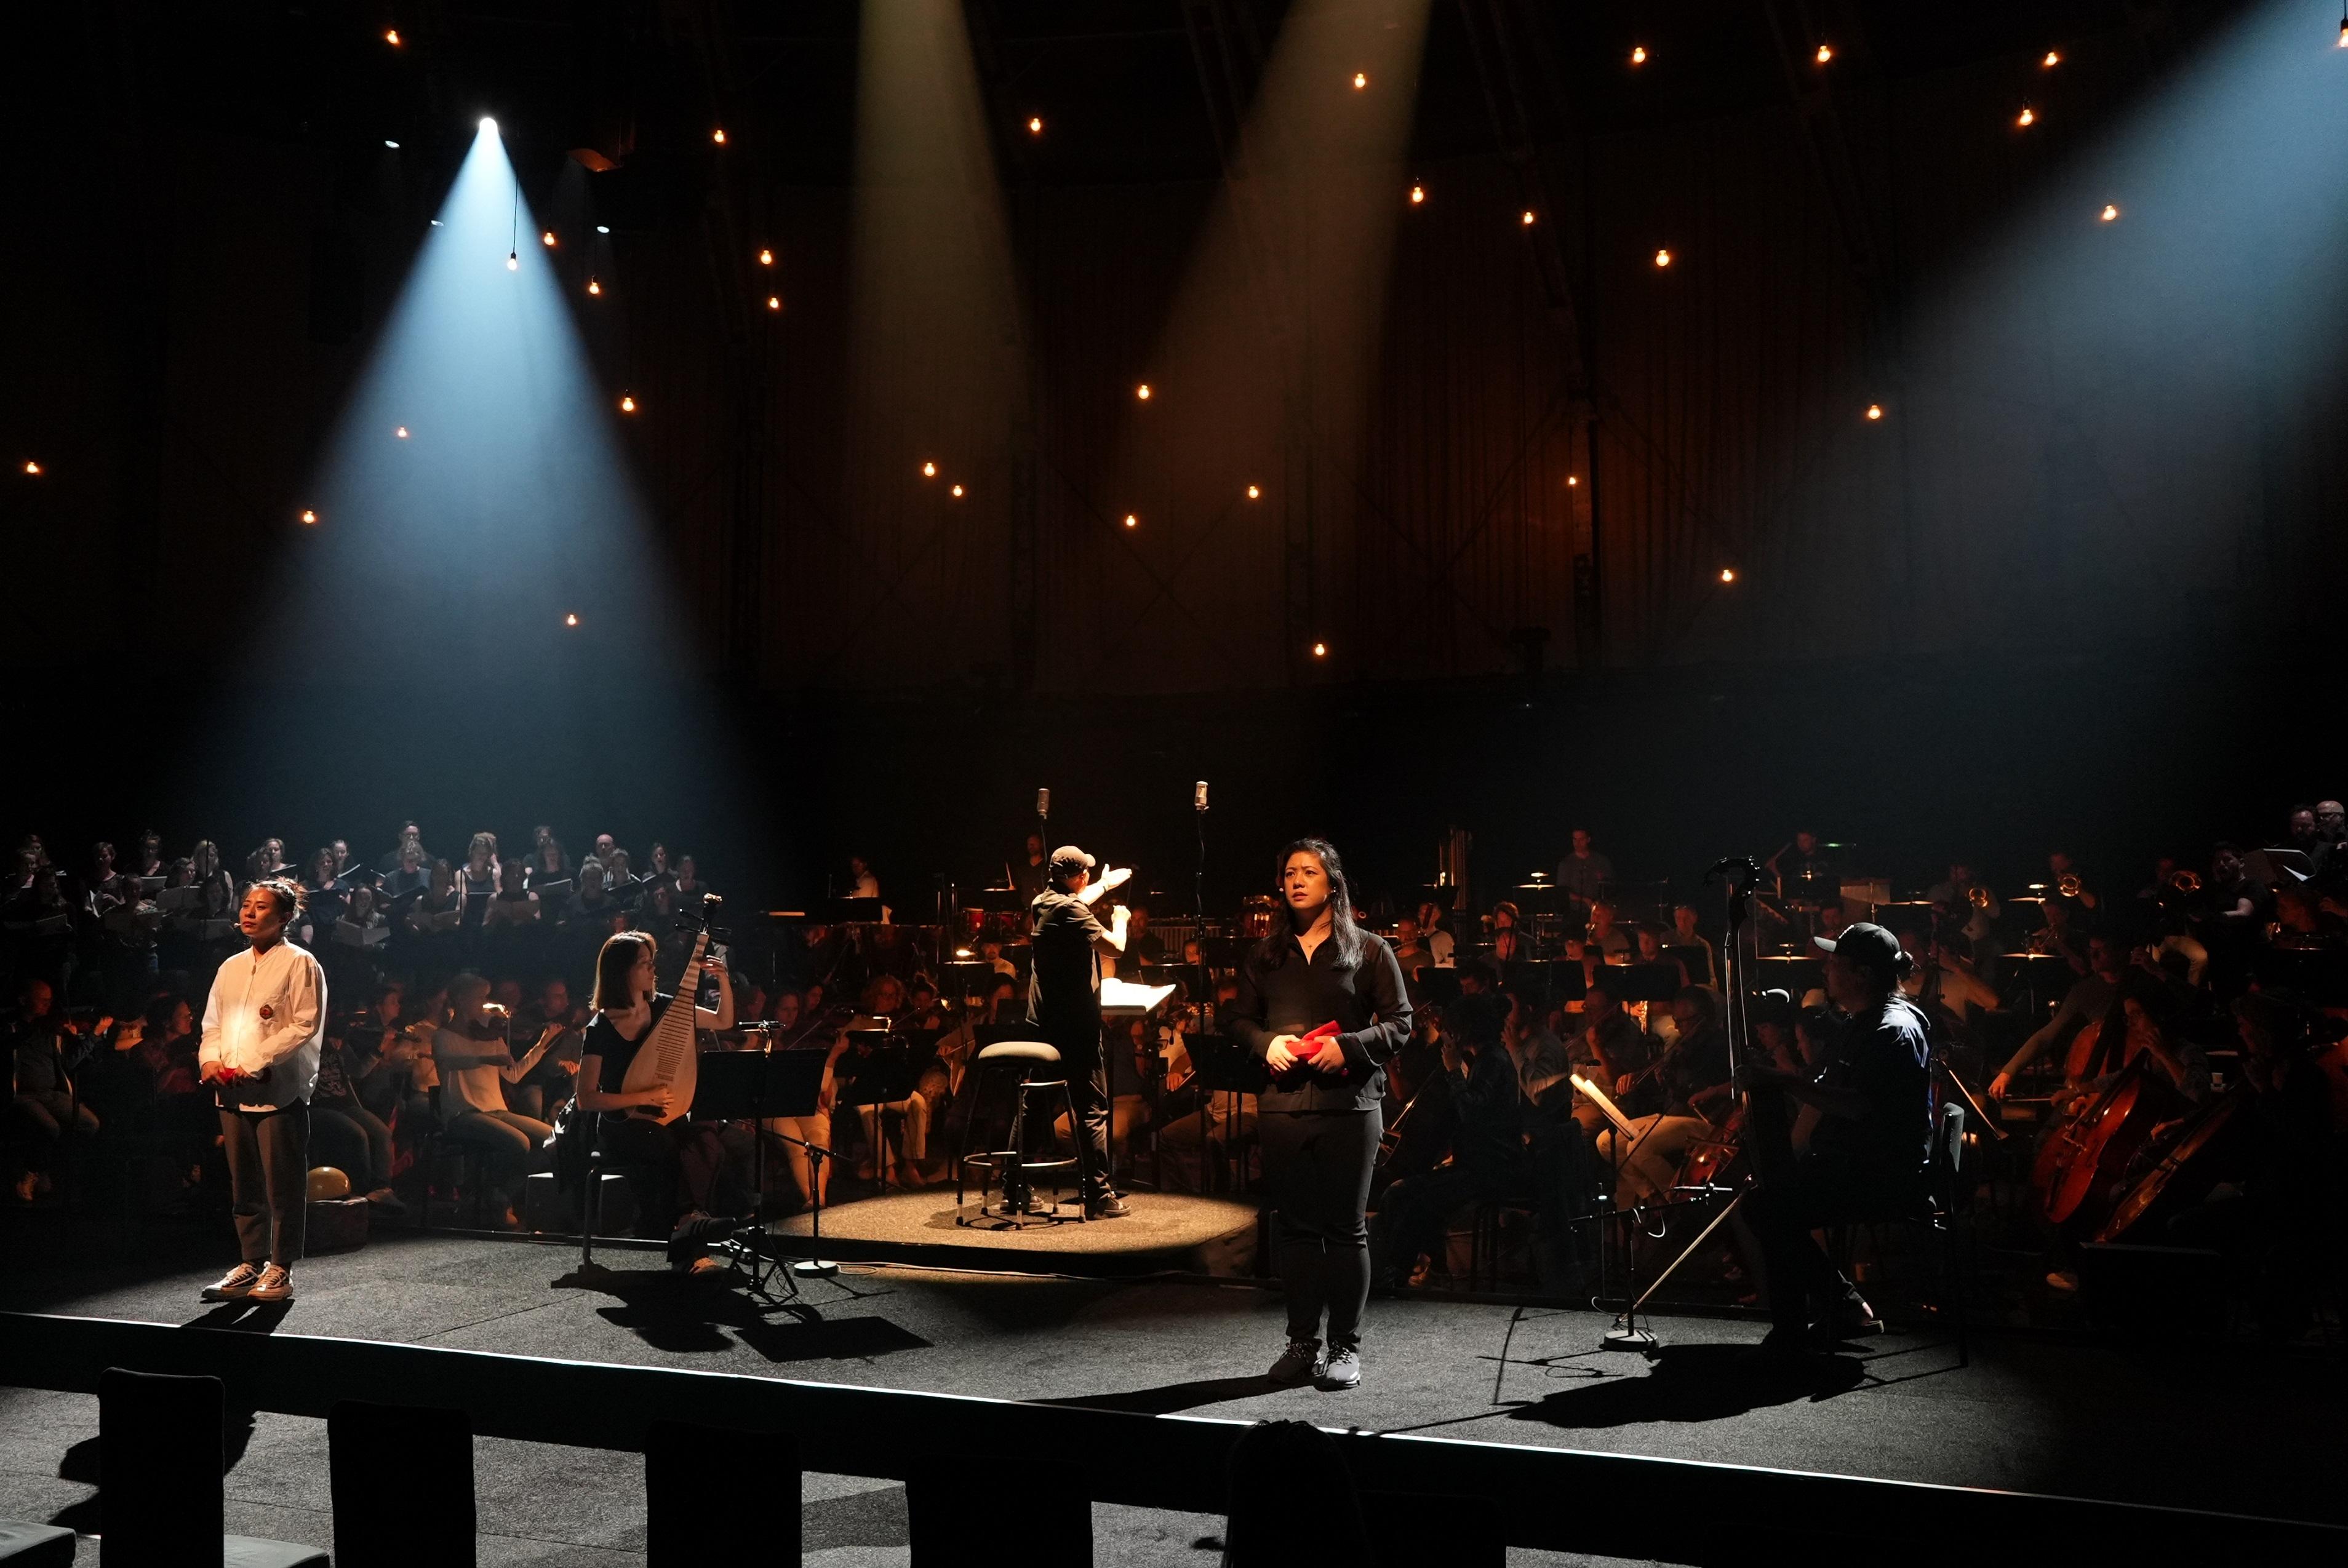 Hong Kong's Ambassador for Cultural Promotion Tan Dun invited Hong Kong young soprano Candice Chung to perform the world premiere of "Requiem for Nature" at the 76th edition of the Holland Festival. Photo shows Tan (centre) and Candice Chung (second right) rehearsing before the performance.